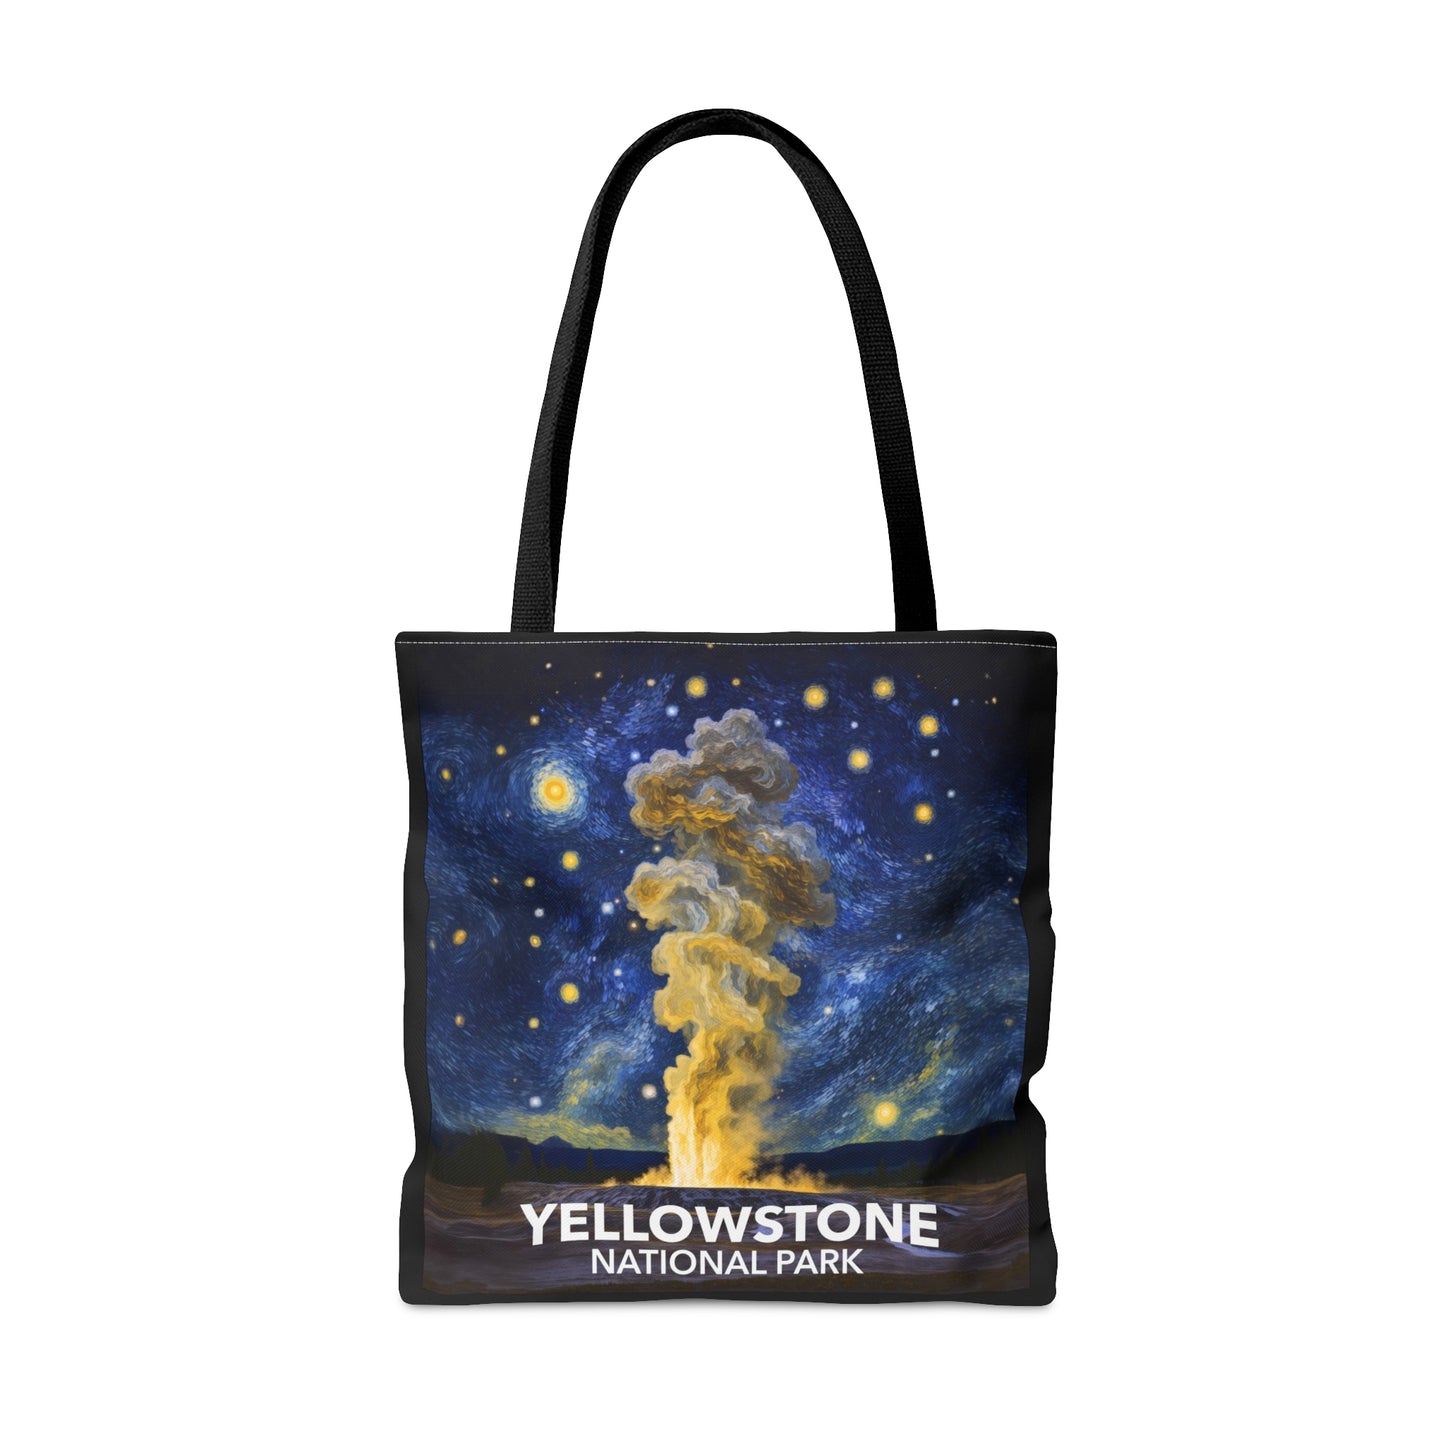 Yellowstone National Park Tote Bag - Old Faithful Starry Night